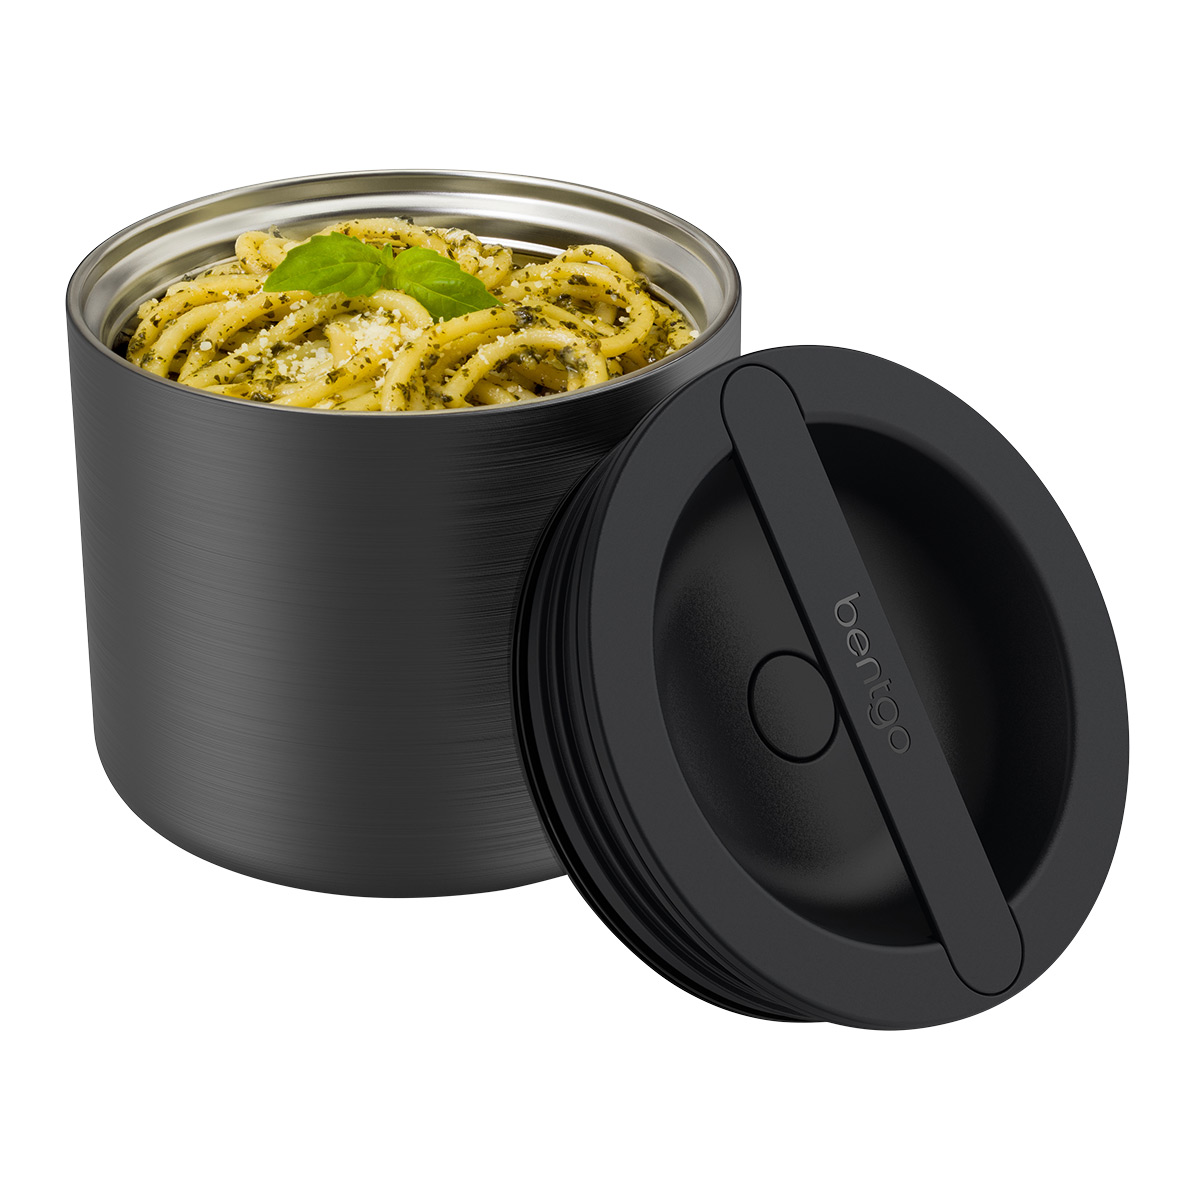 https://www.containerstore.com/catalogimages/478572/10092900-bentgo-insulated-food-conta.jpg